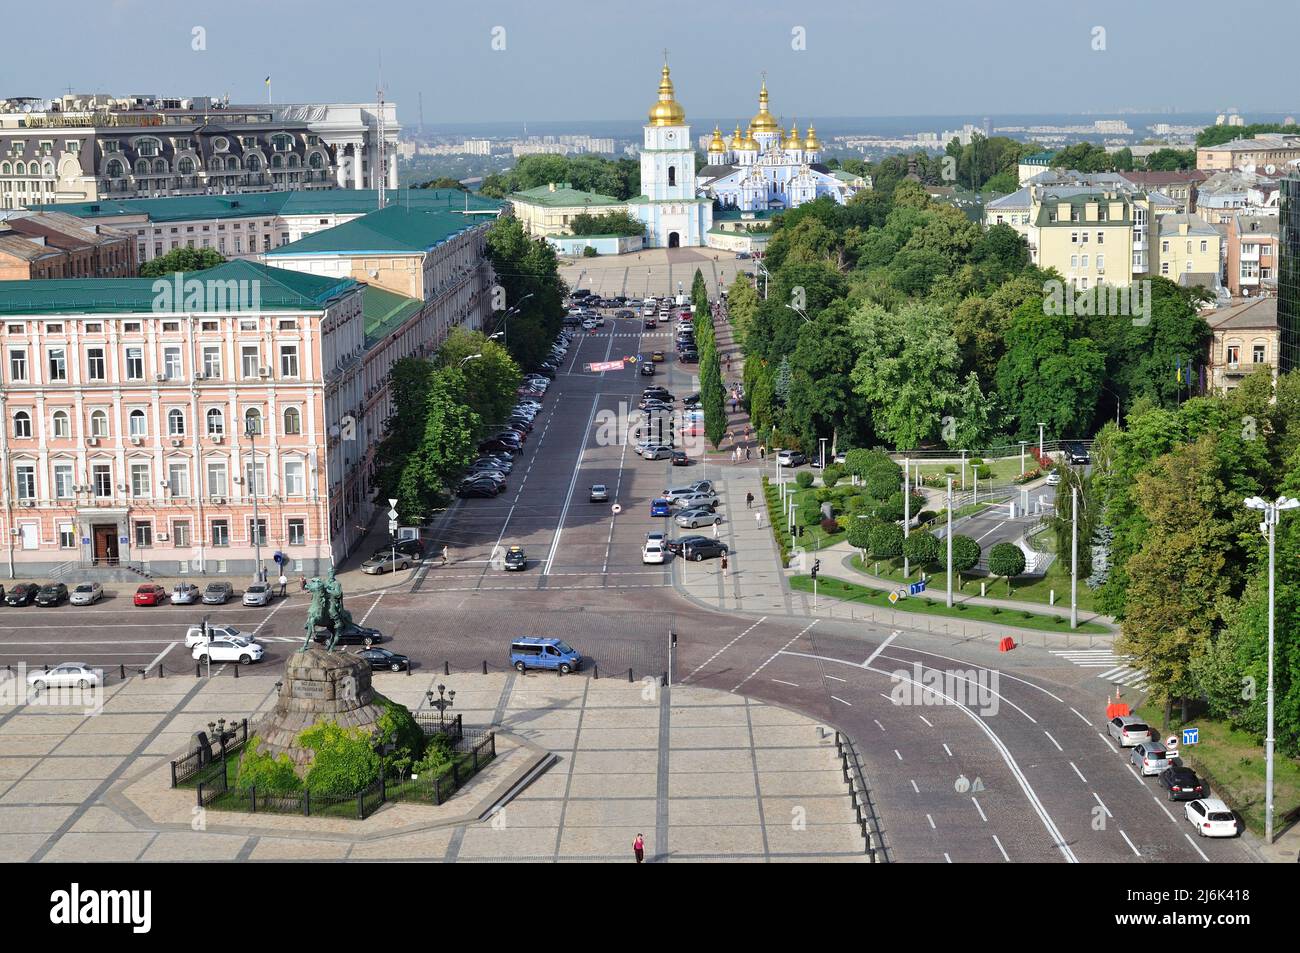 Sofia Square and St. Michael's Golden-Domed Monastery in Kiev Stock Photo